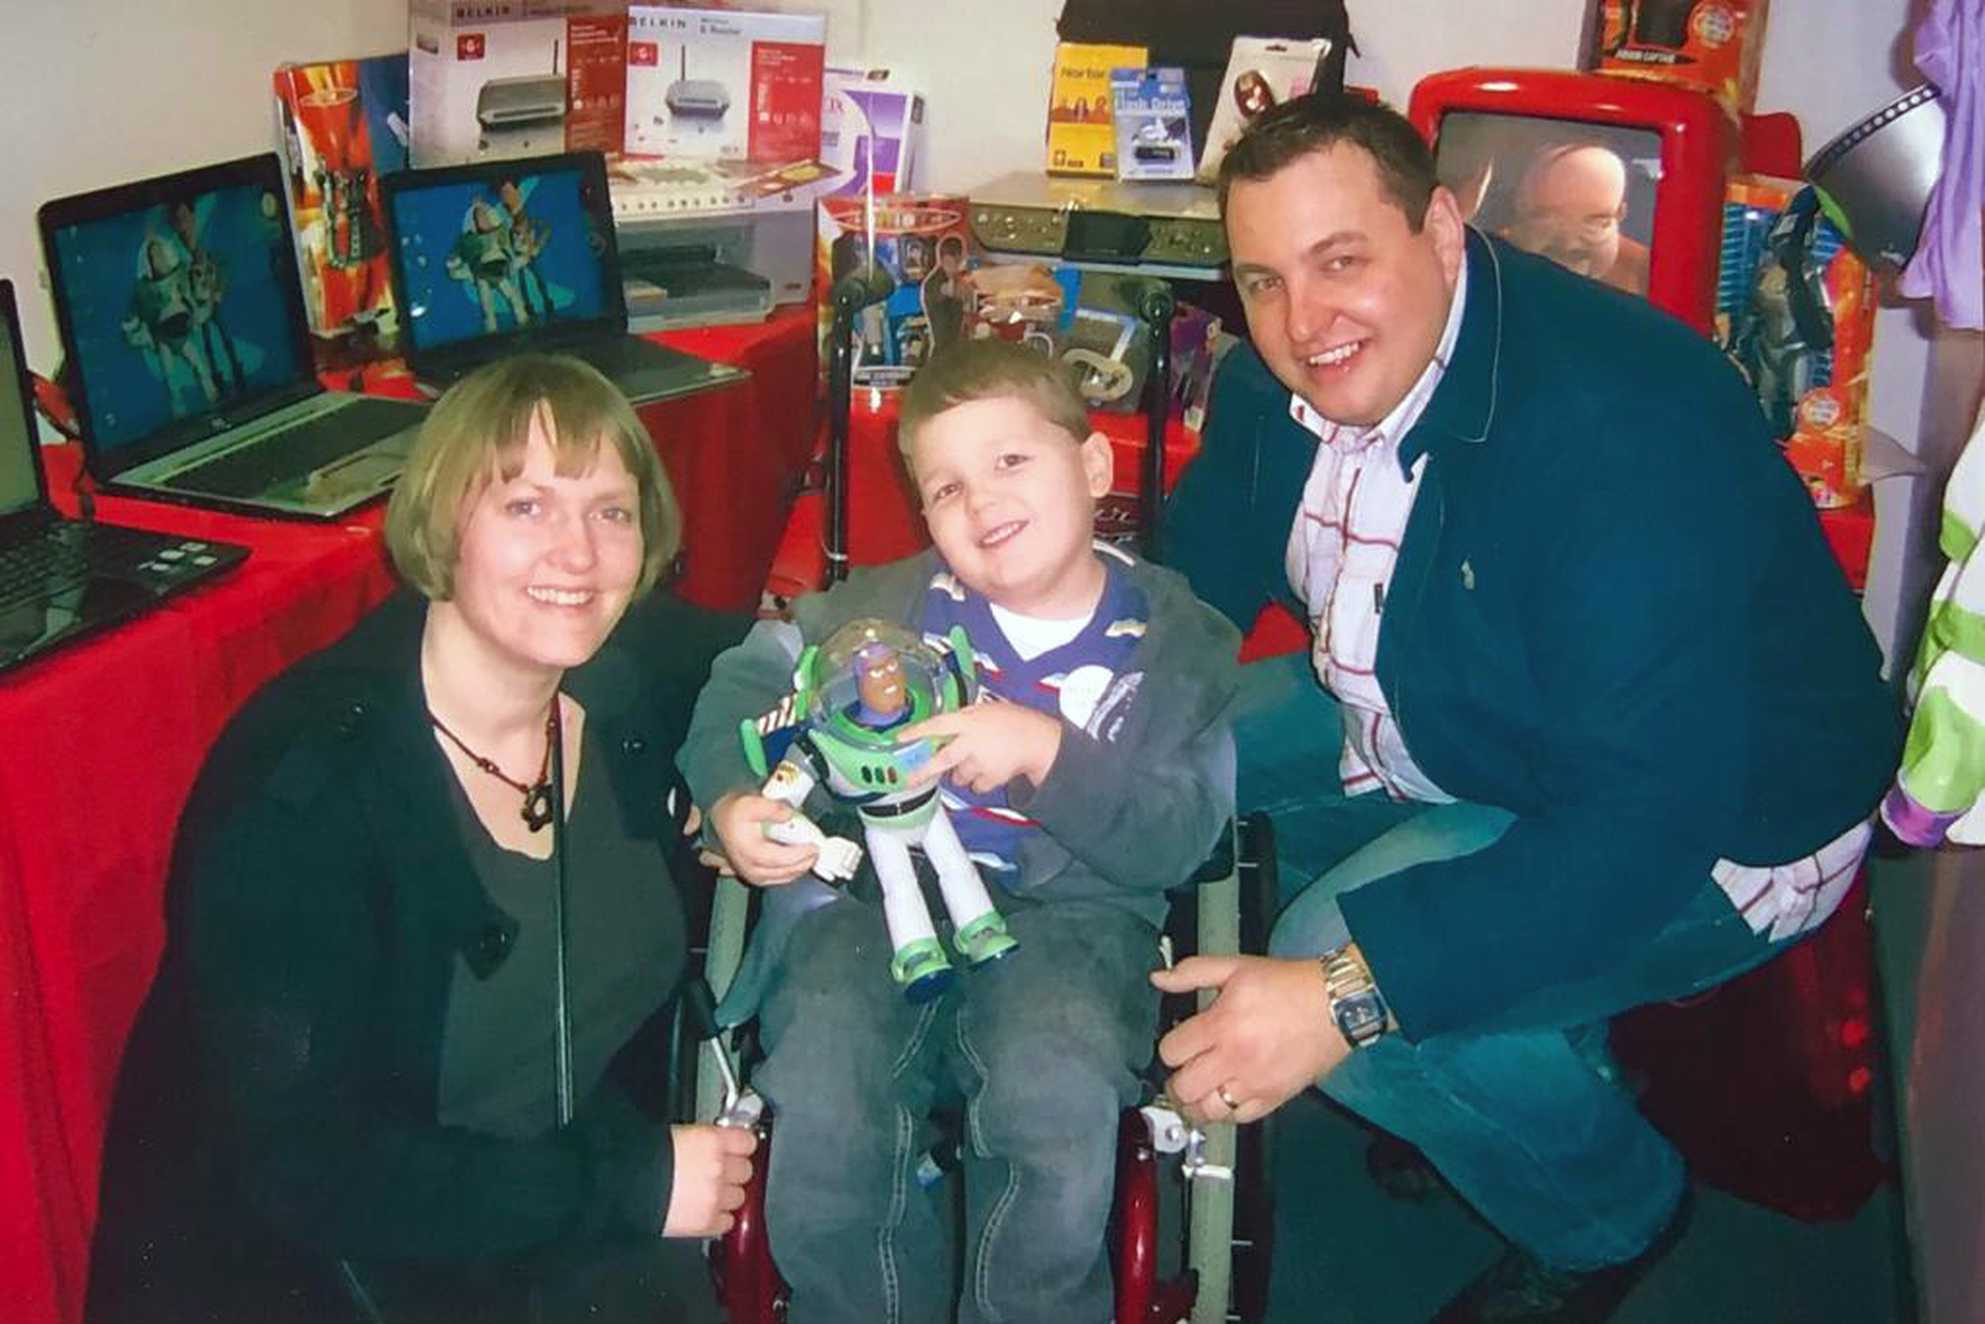 Jacob, holding a Buzz Lightyear doll, with his mum and dad.